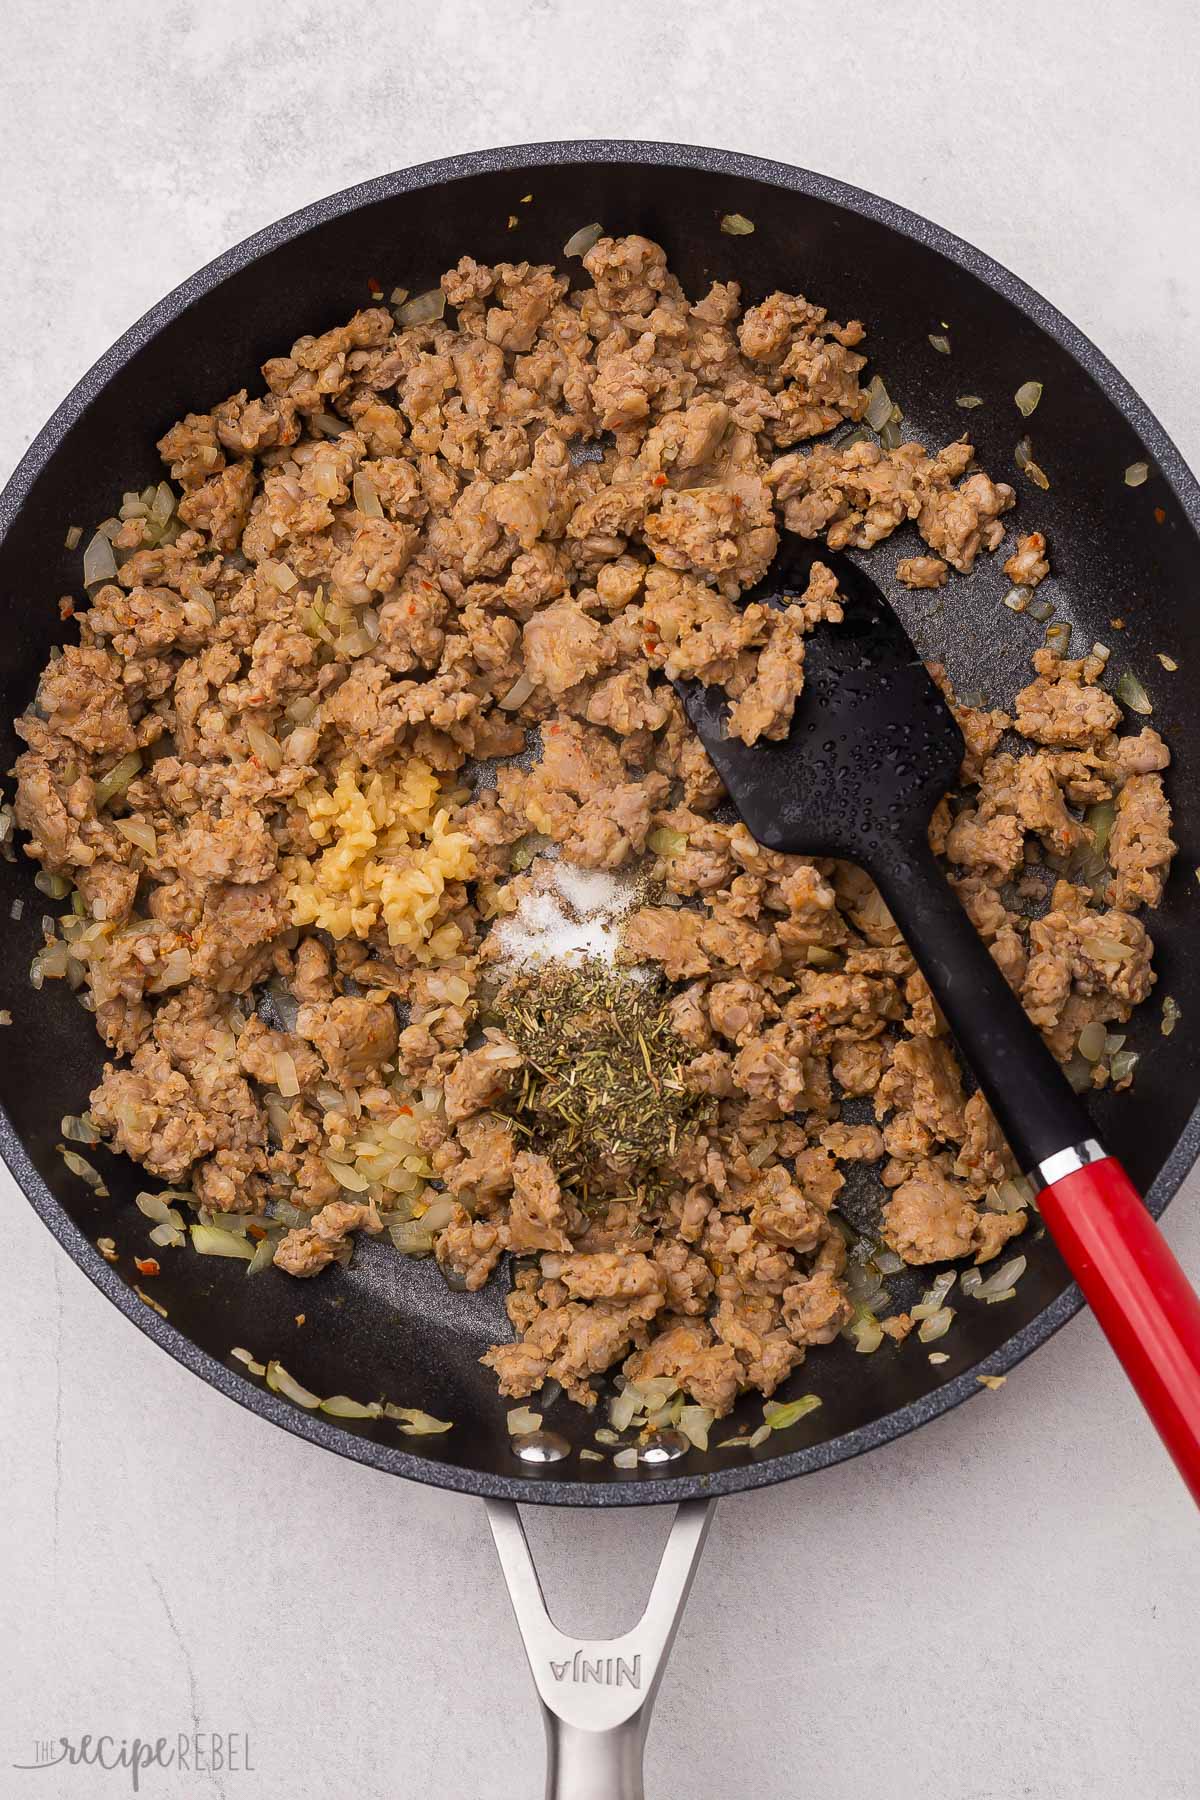 cooked meat in frying pan with spices placed on top and spatula in pan.